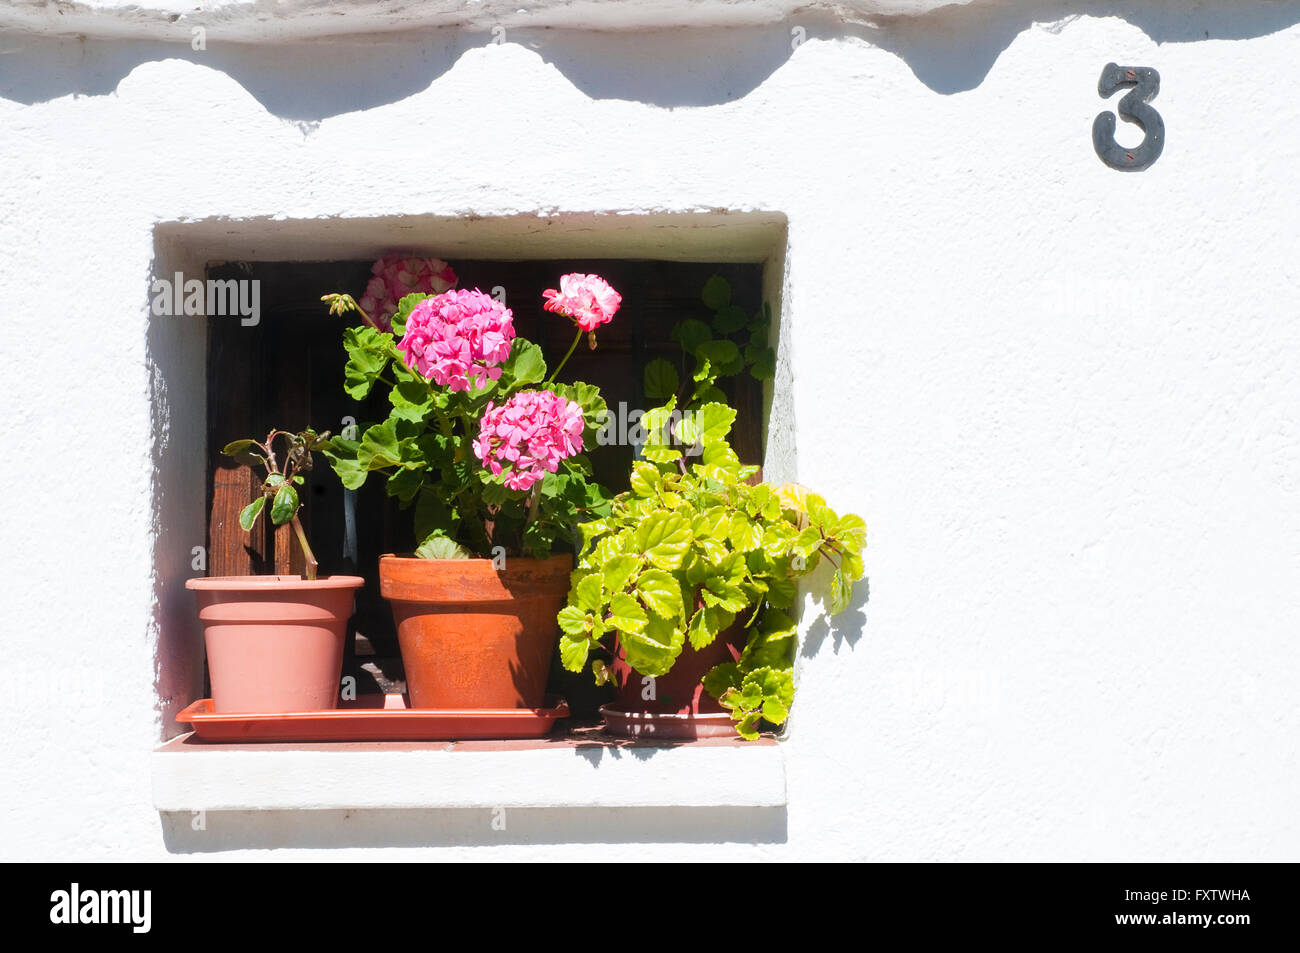 Flower pots in small window. Hervas, Caceres province, Extremadura, Spain. Stock Photo